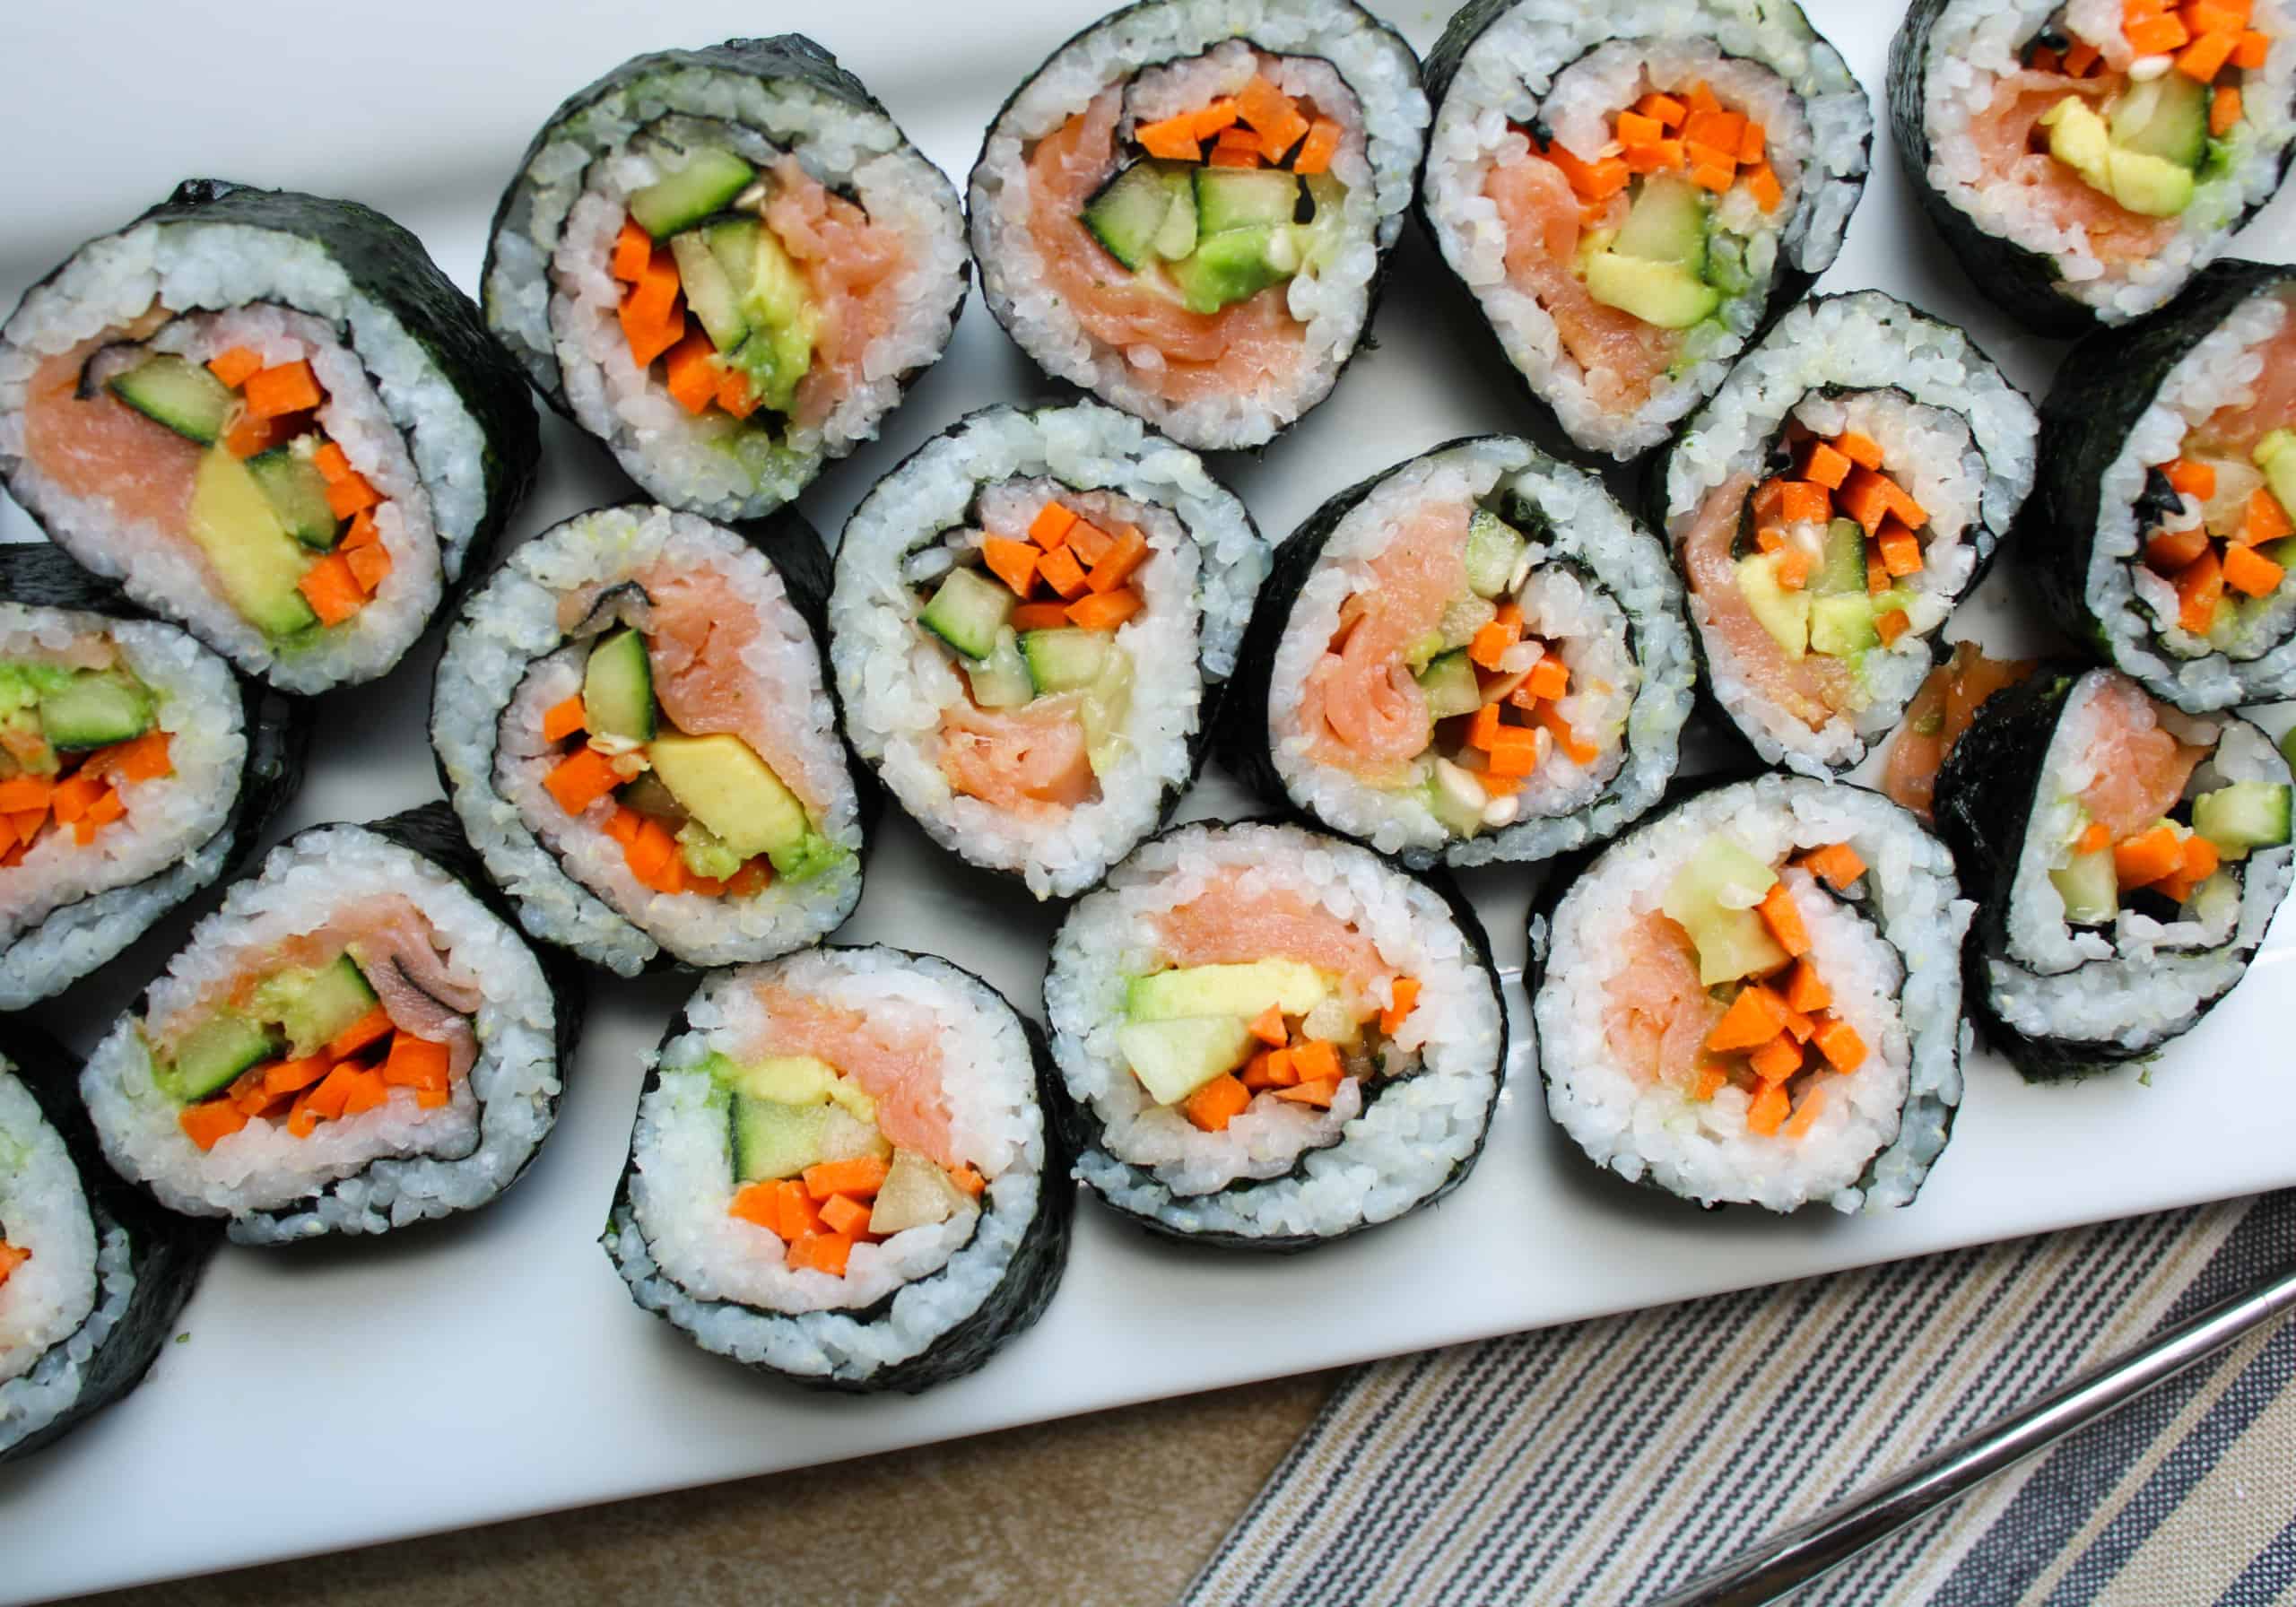 https://recipes.net/wp-content/uploads/2024/01/how-to-make-sushi-rolls-ingredients-1704518175.jpg